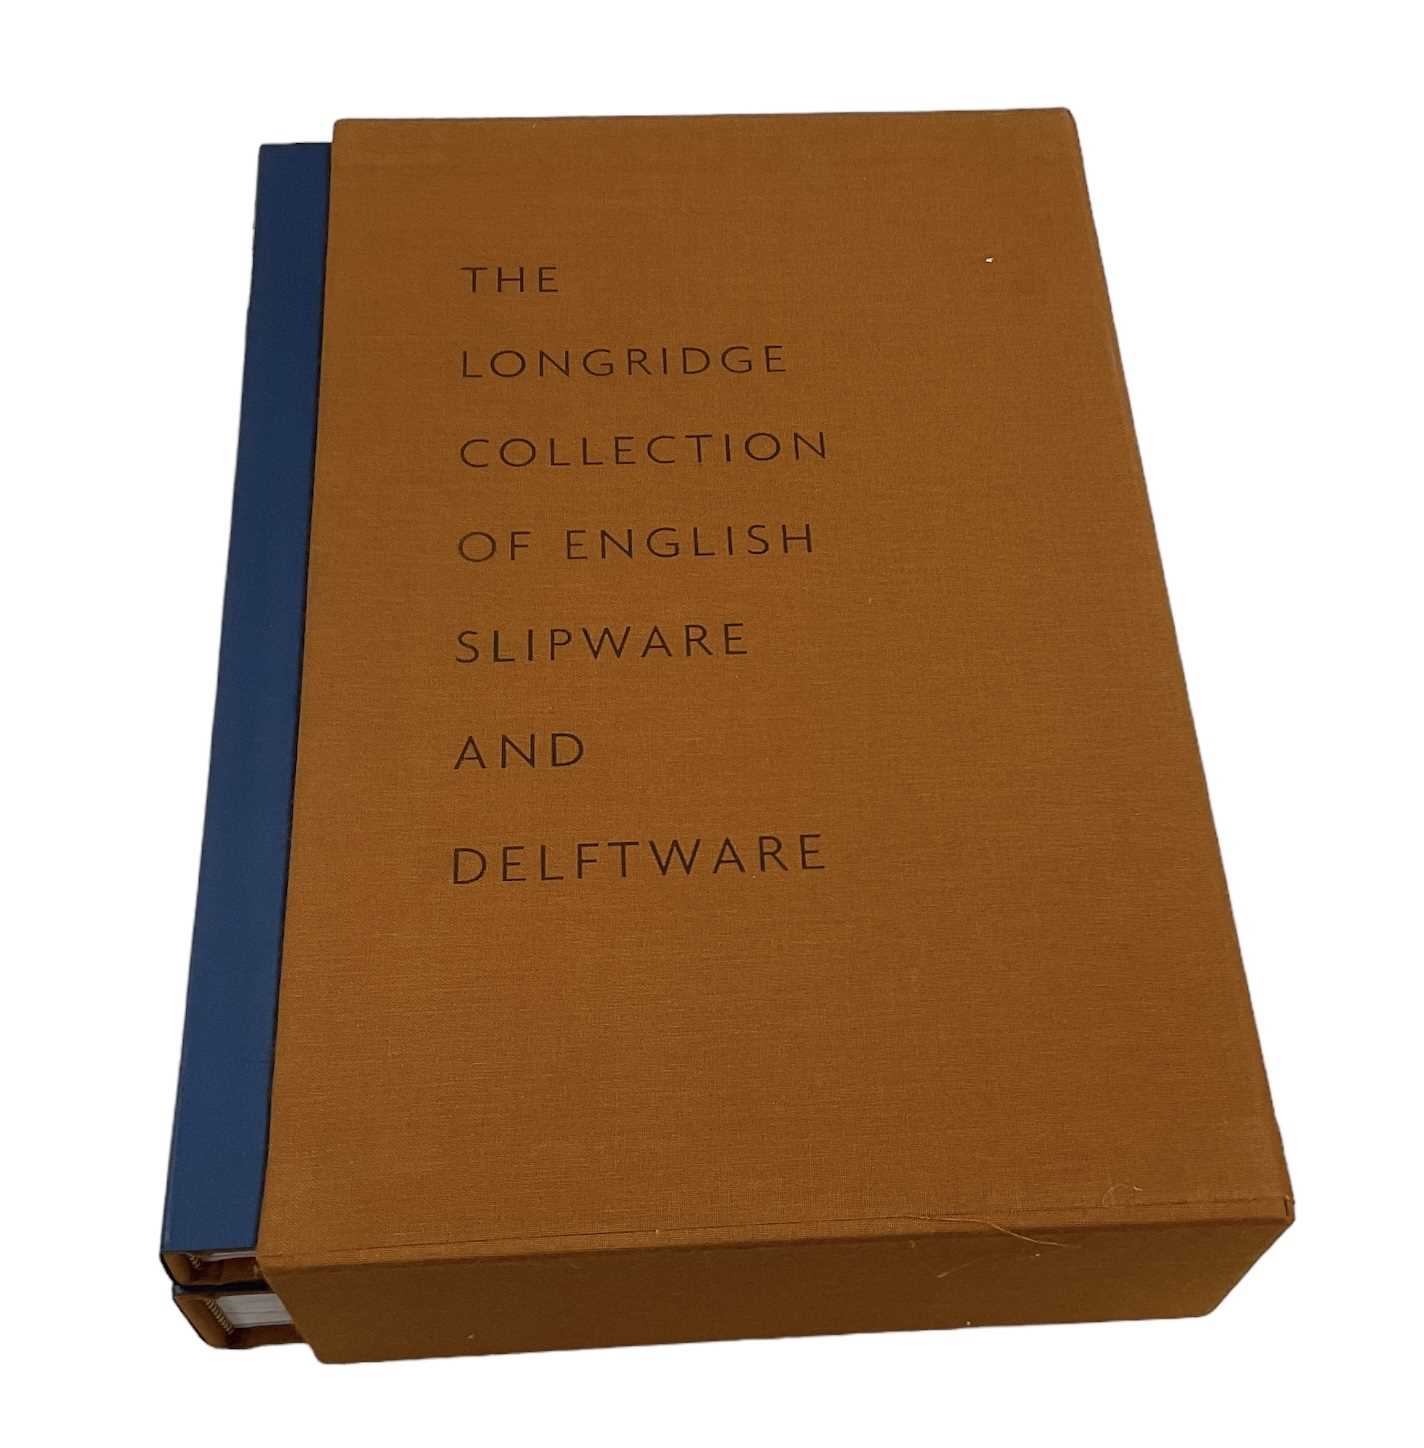 THE LONGRIDGE COLLECTION OF ENGLISH SLIPWARE AND DELFTWARE; a cased book comprising two volumes.